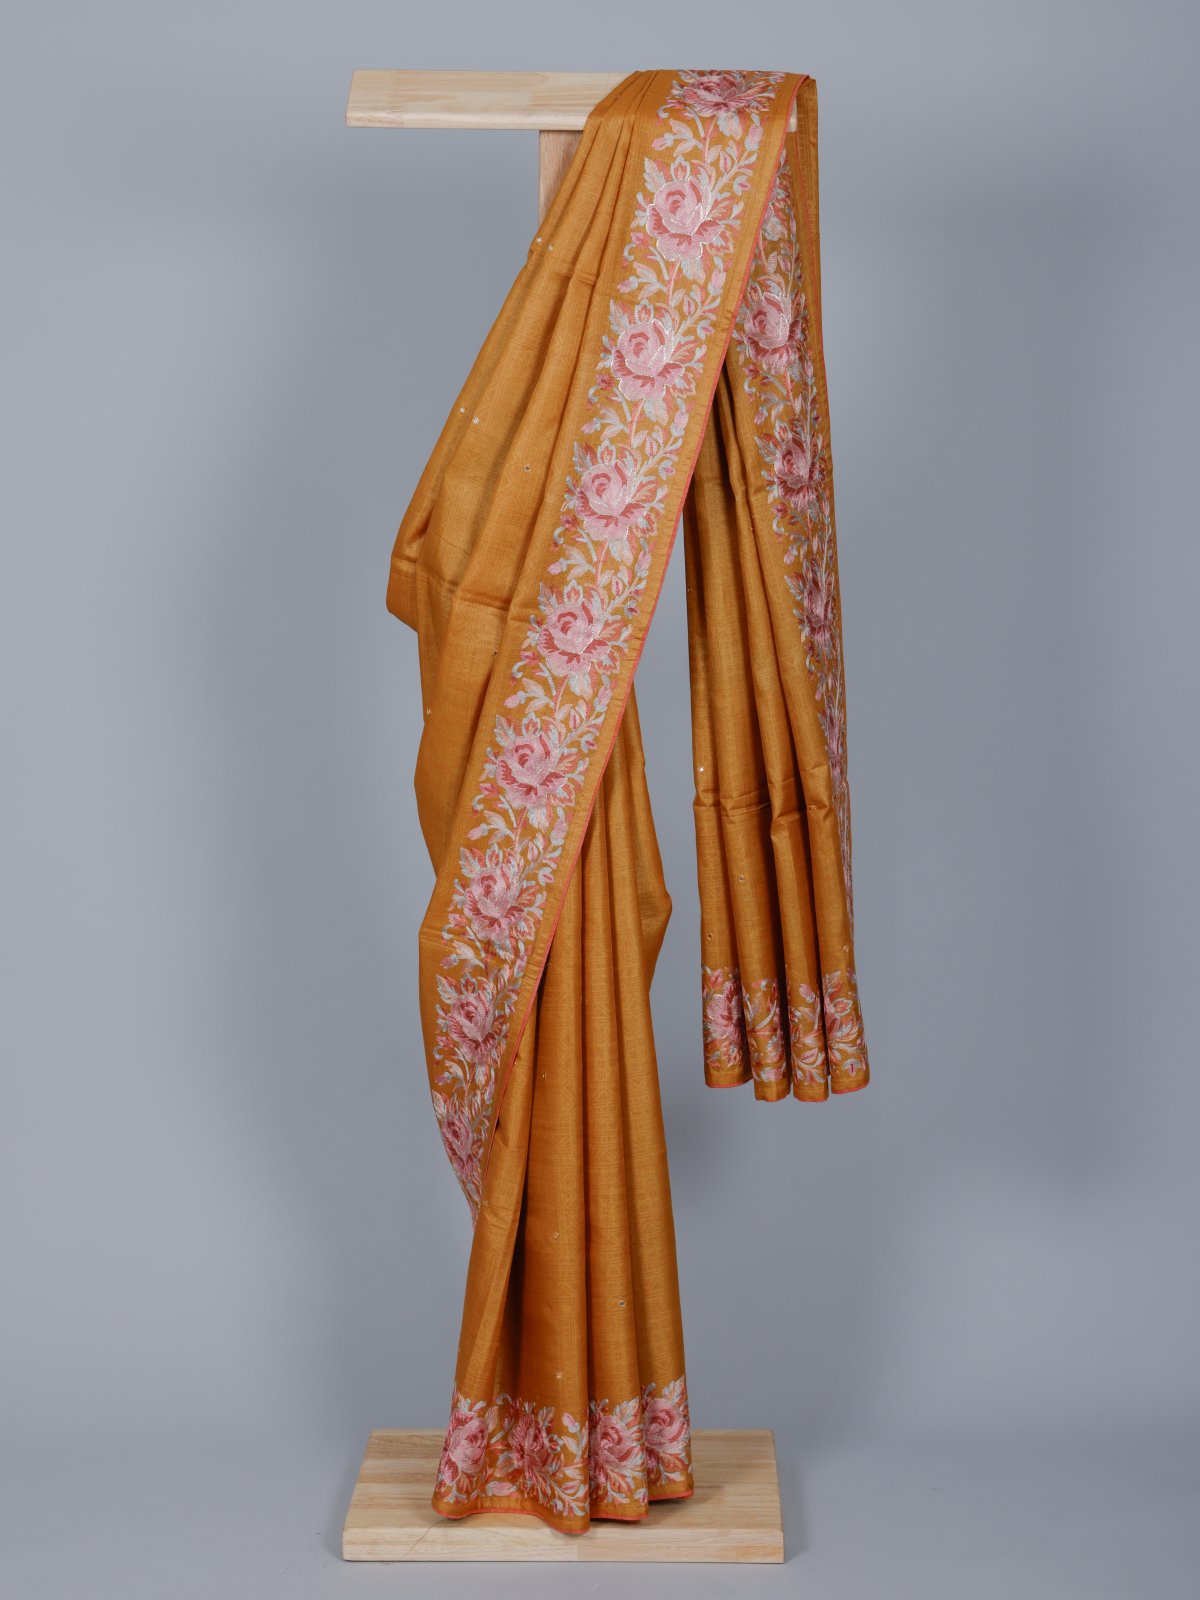 Yolk Yellow Tussar Silk Saree with Floral Embroidery Border